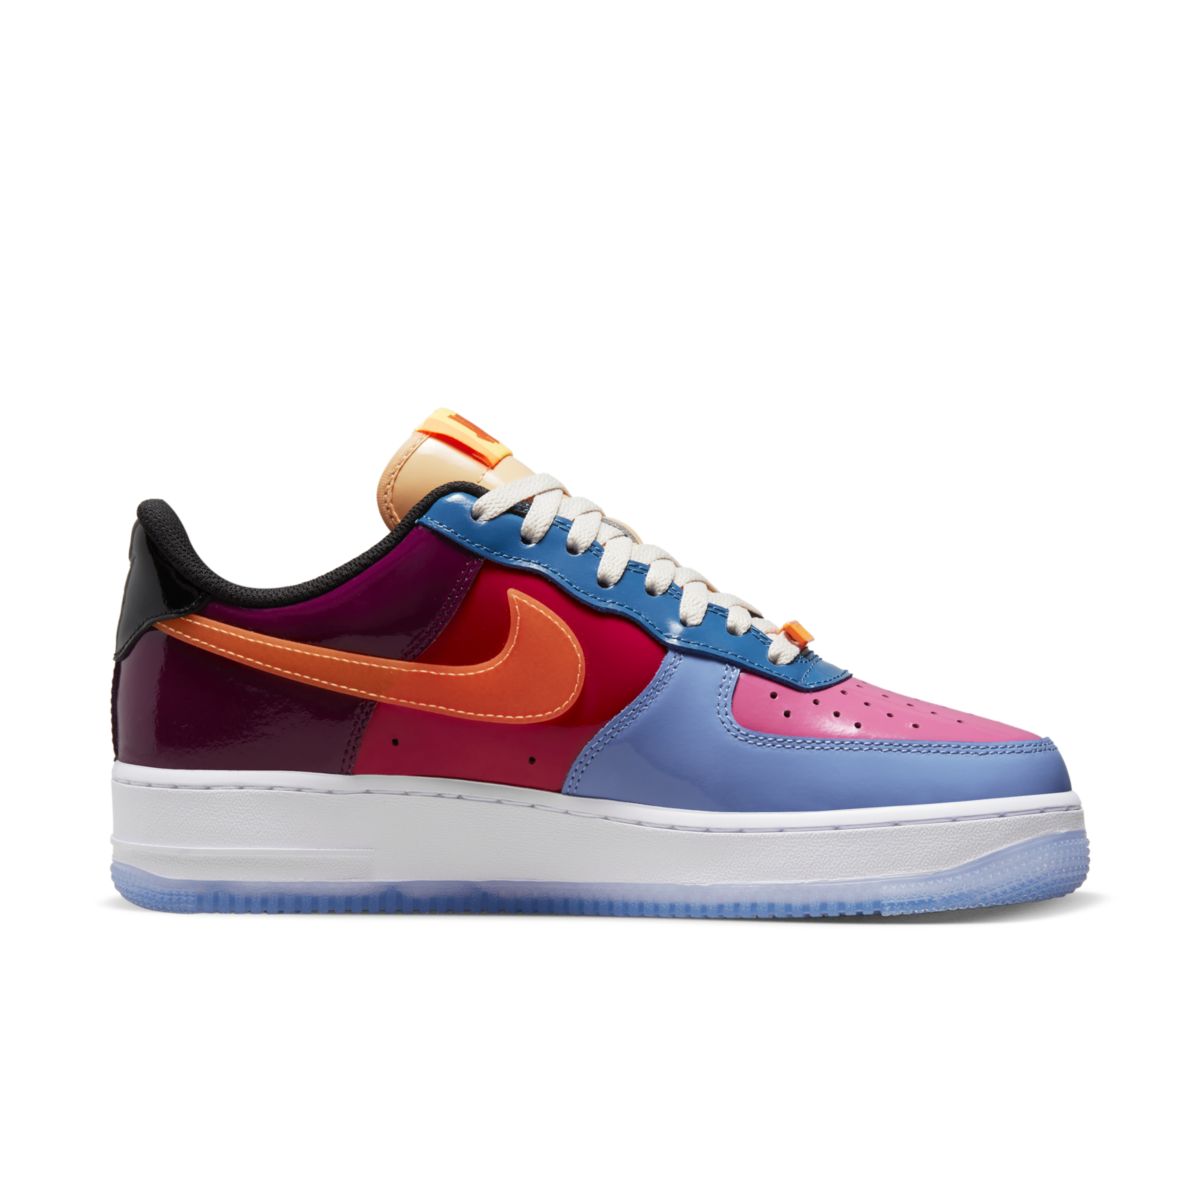 Undefeated x Nike Air Force 1 Low SP Total Orange DV5255-400 3